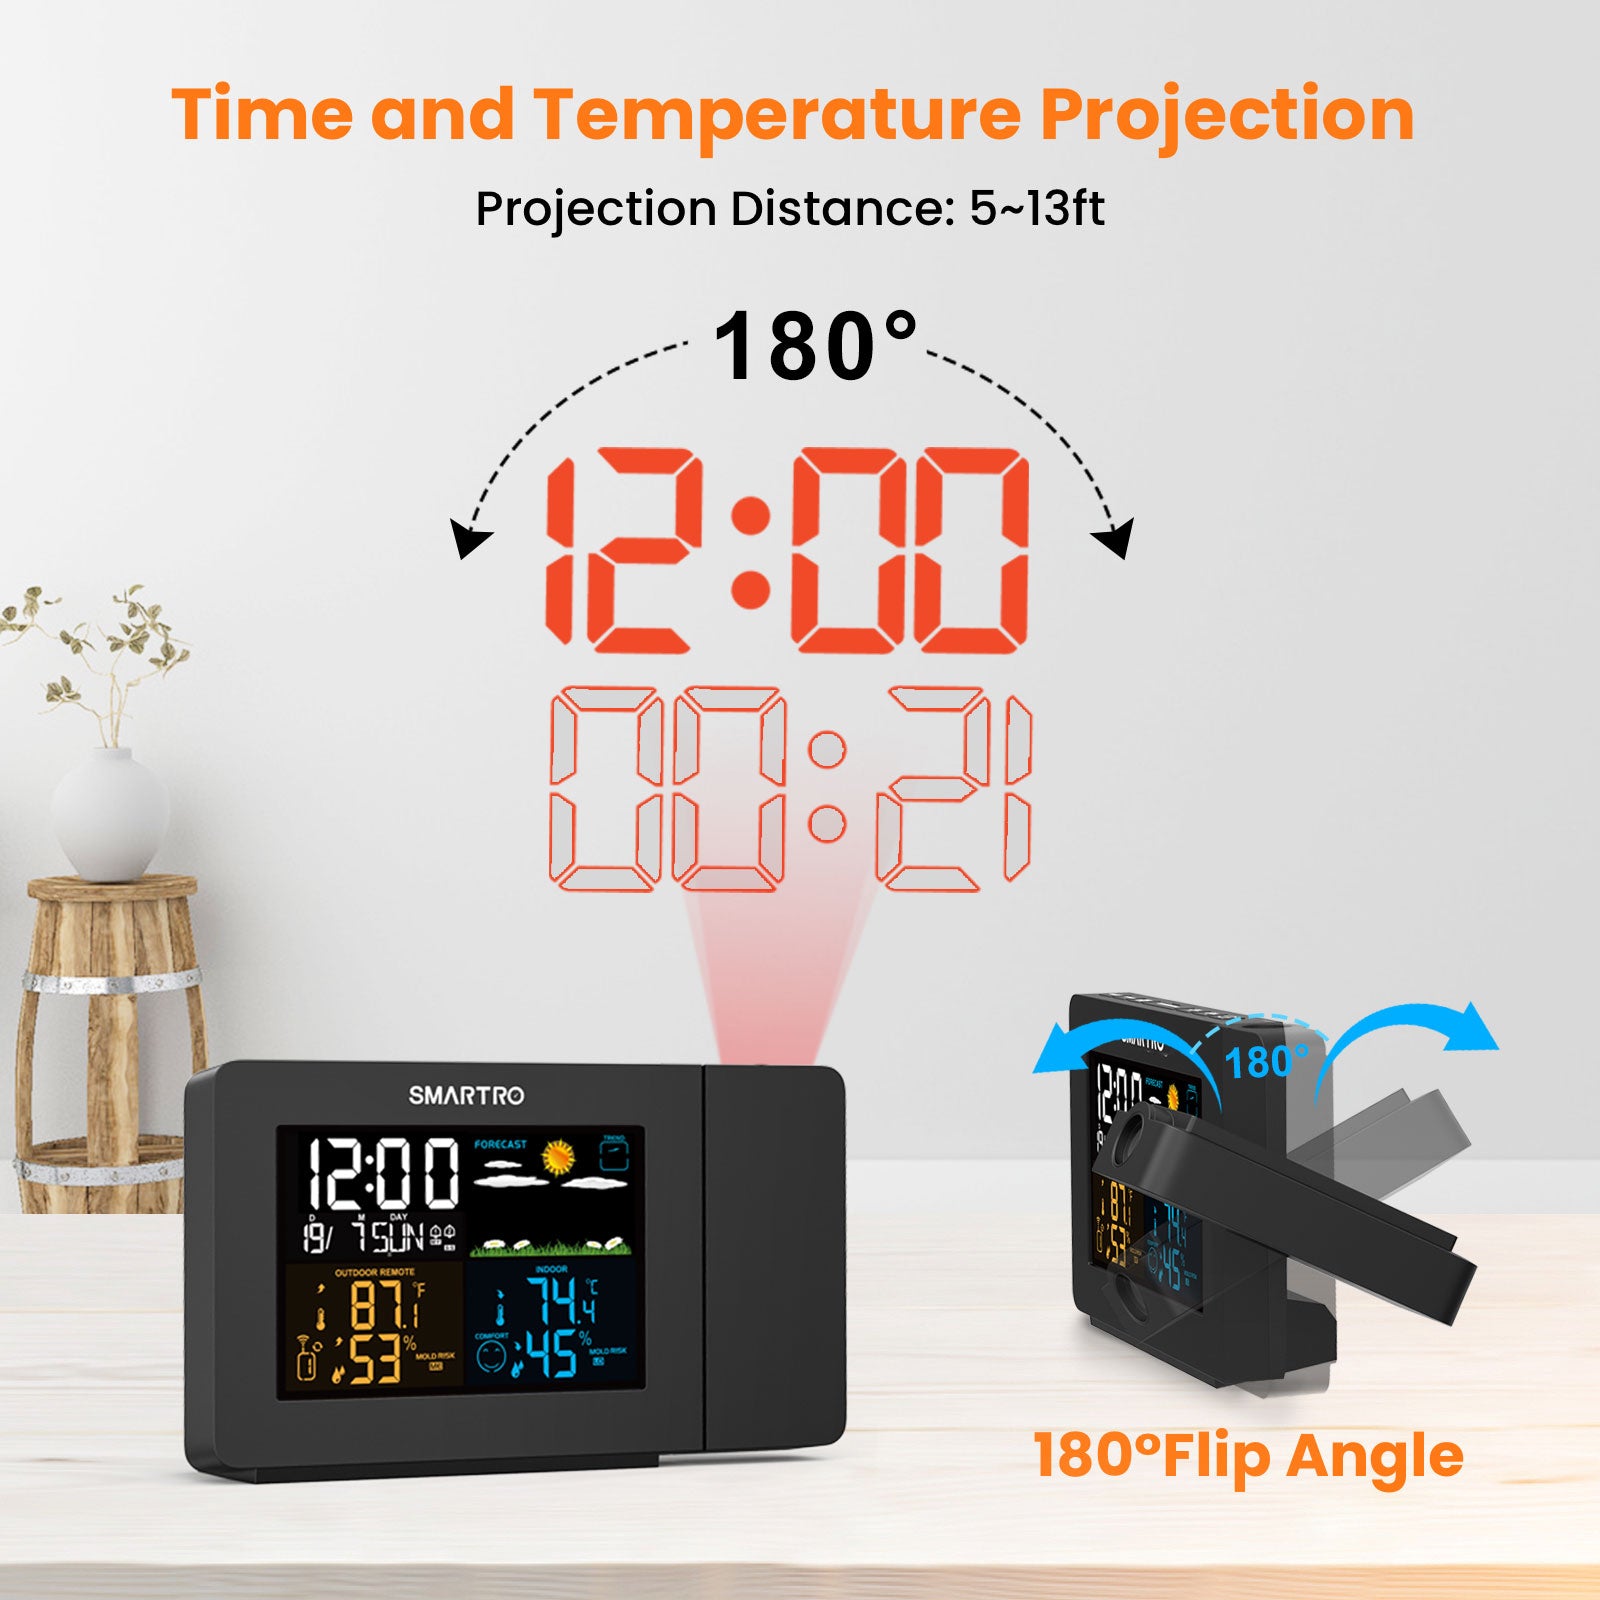 Smartro SC31 Projection Alarm Clock Digital Clock with Indoor Thermometer Hygrometer, USB Charger, Dual Alarm Clocks for Bedroom